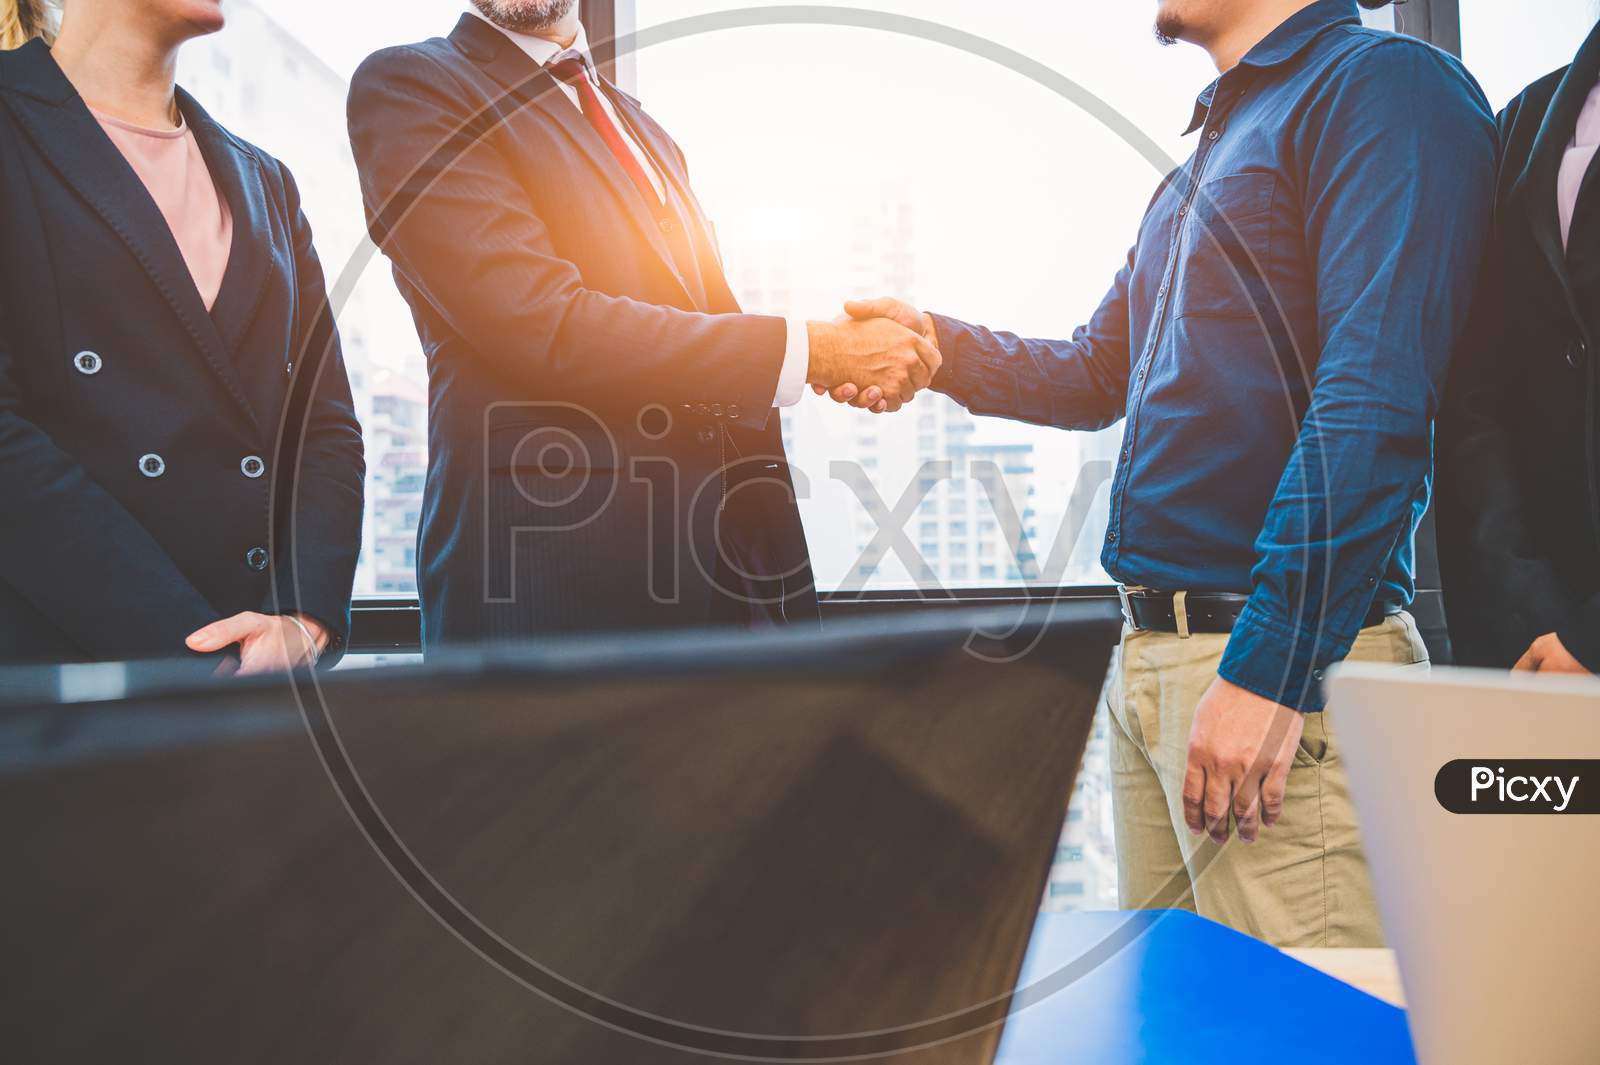 Business Partnership Meeting Handshaking Concept. Businessmen Doing Handshake. Successful Business People Contract Handshaking After Finished Good Dealing With Skyscraper Window Building Background.